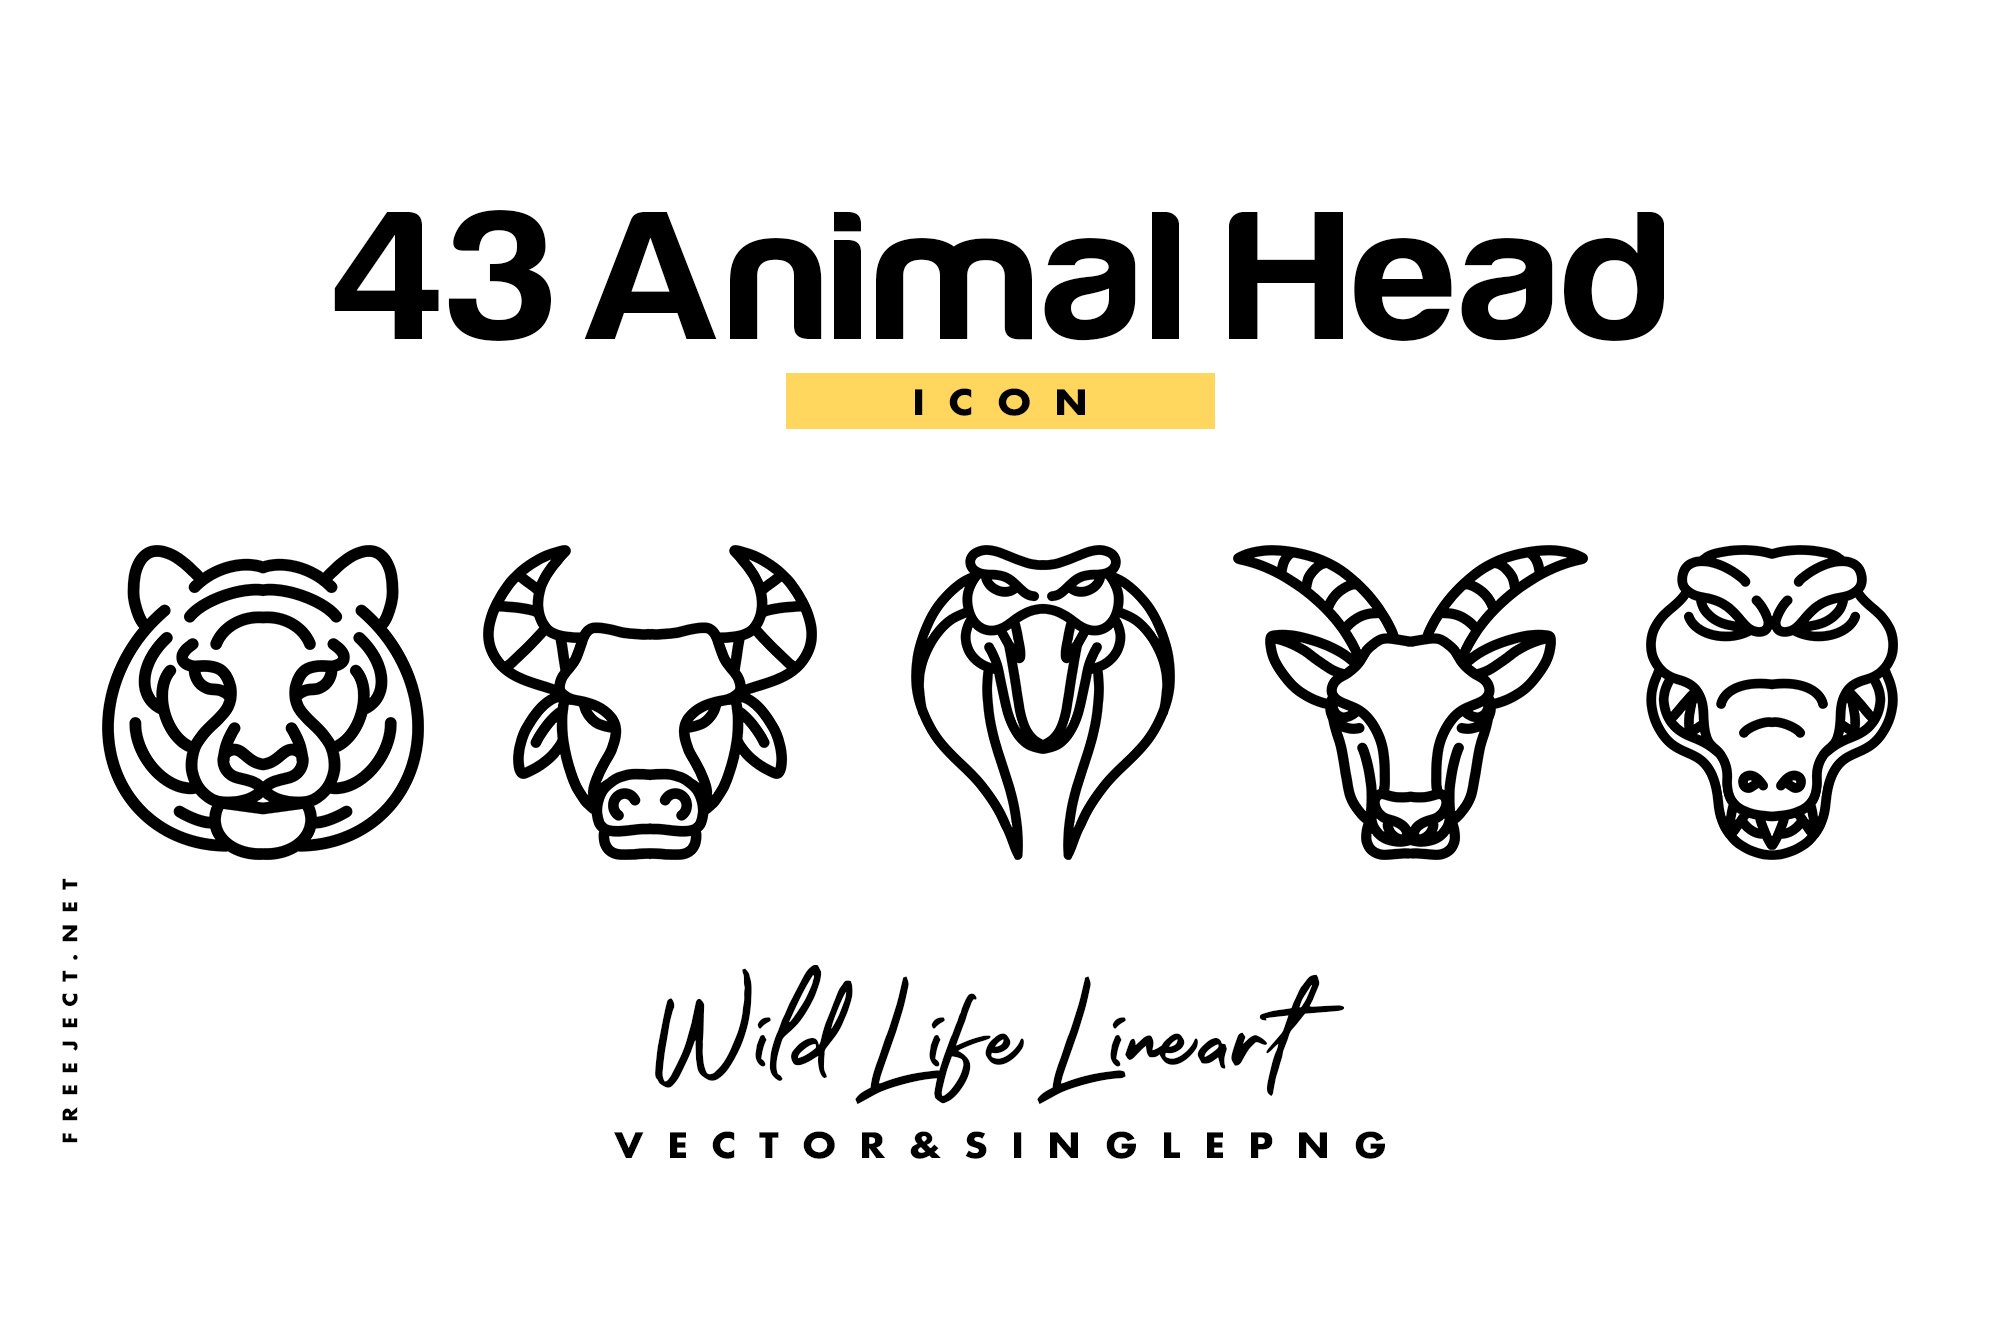 43 Animal Head Hand Drawn Vector cover image.